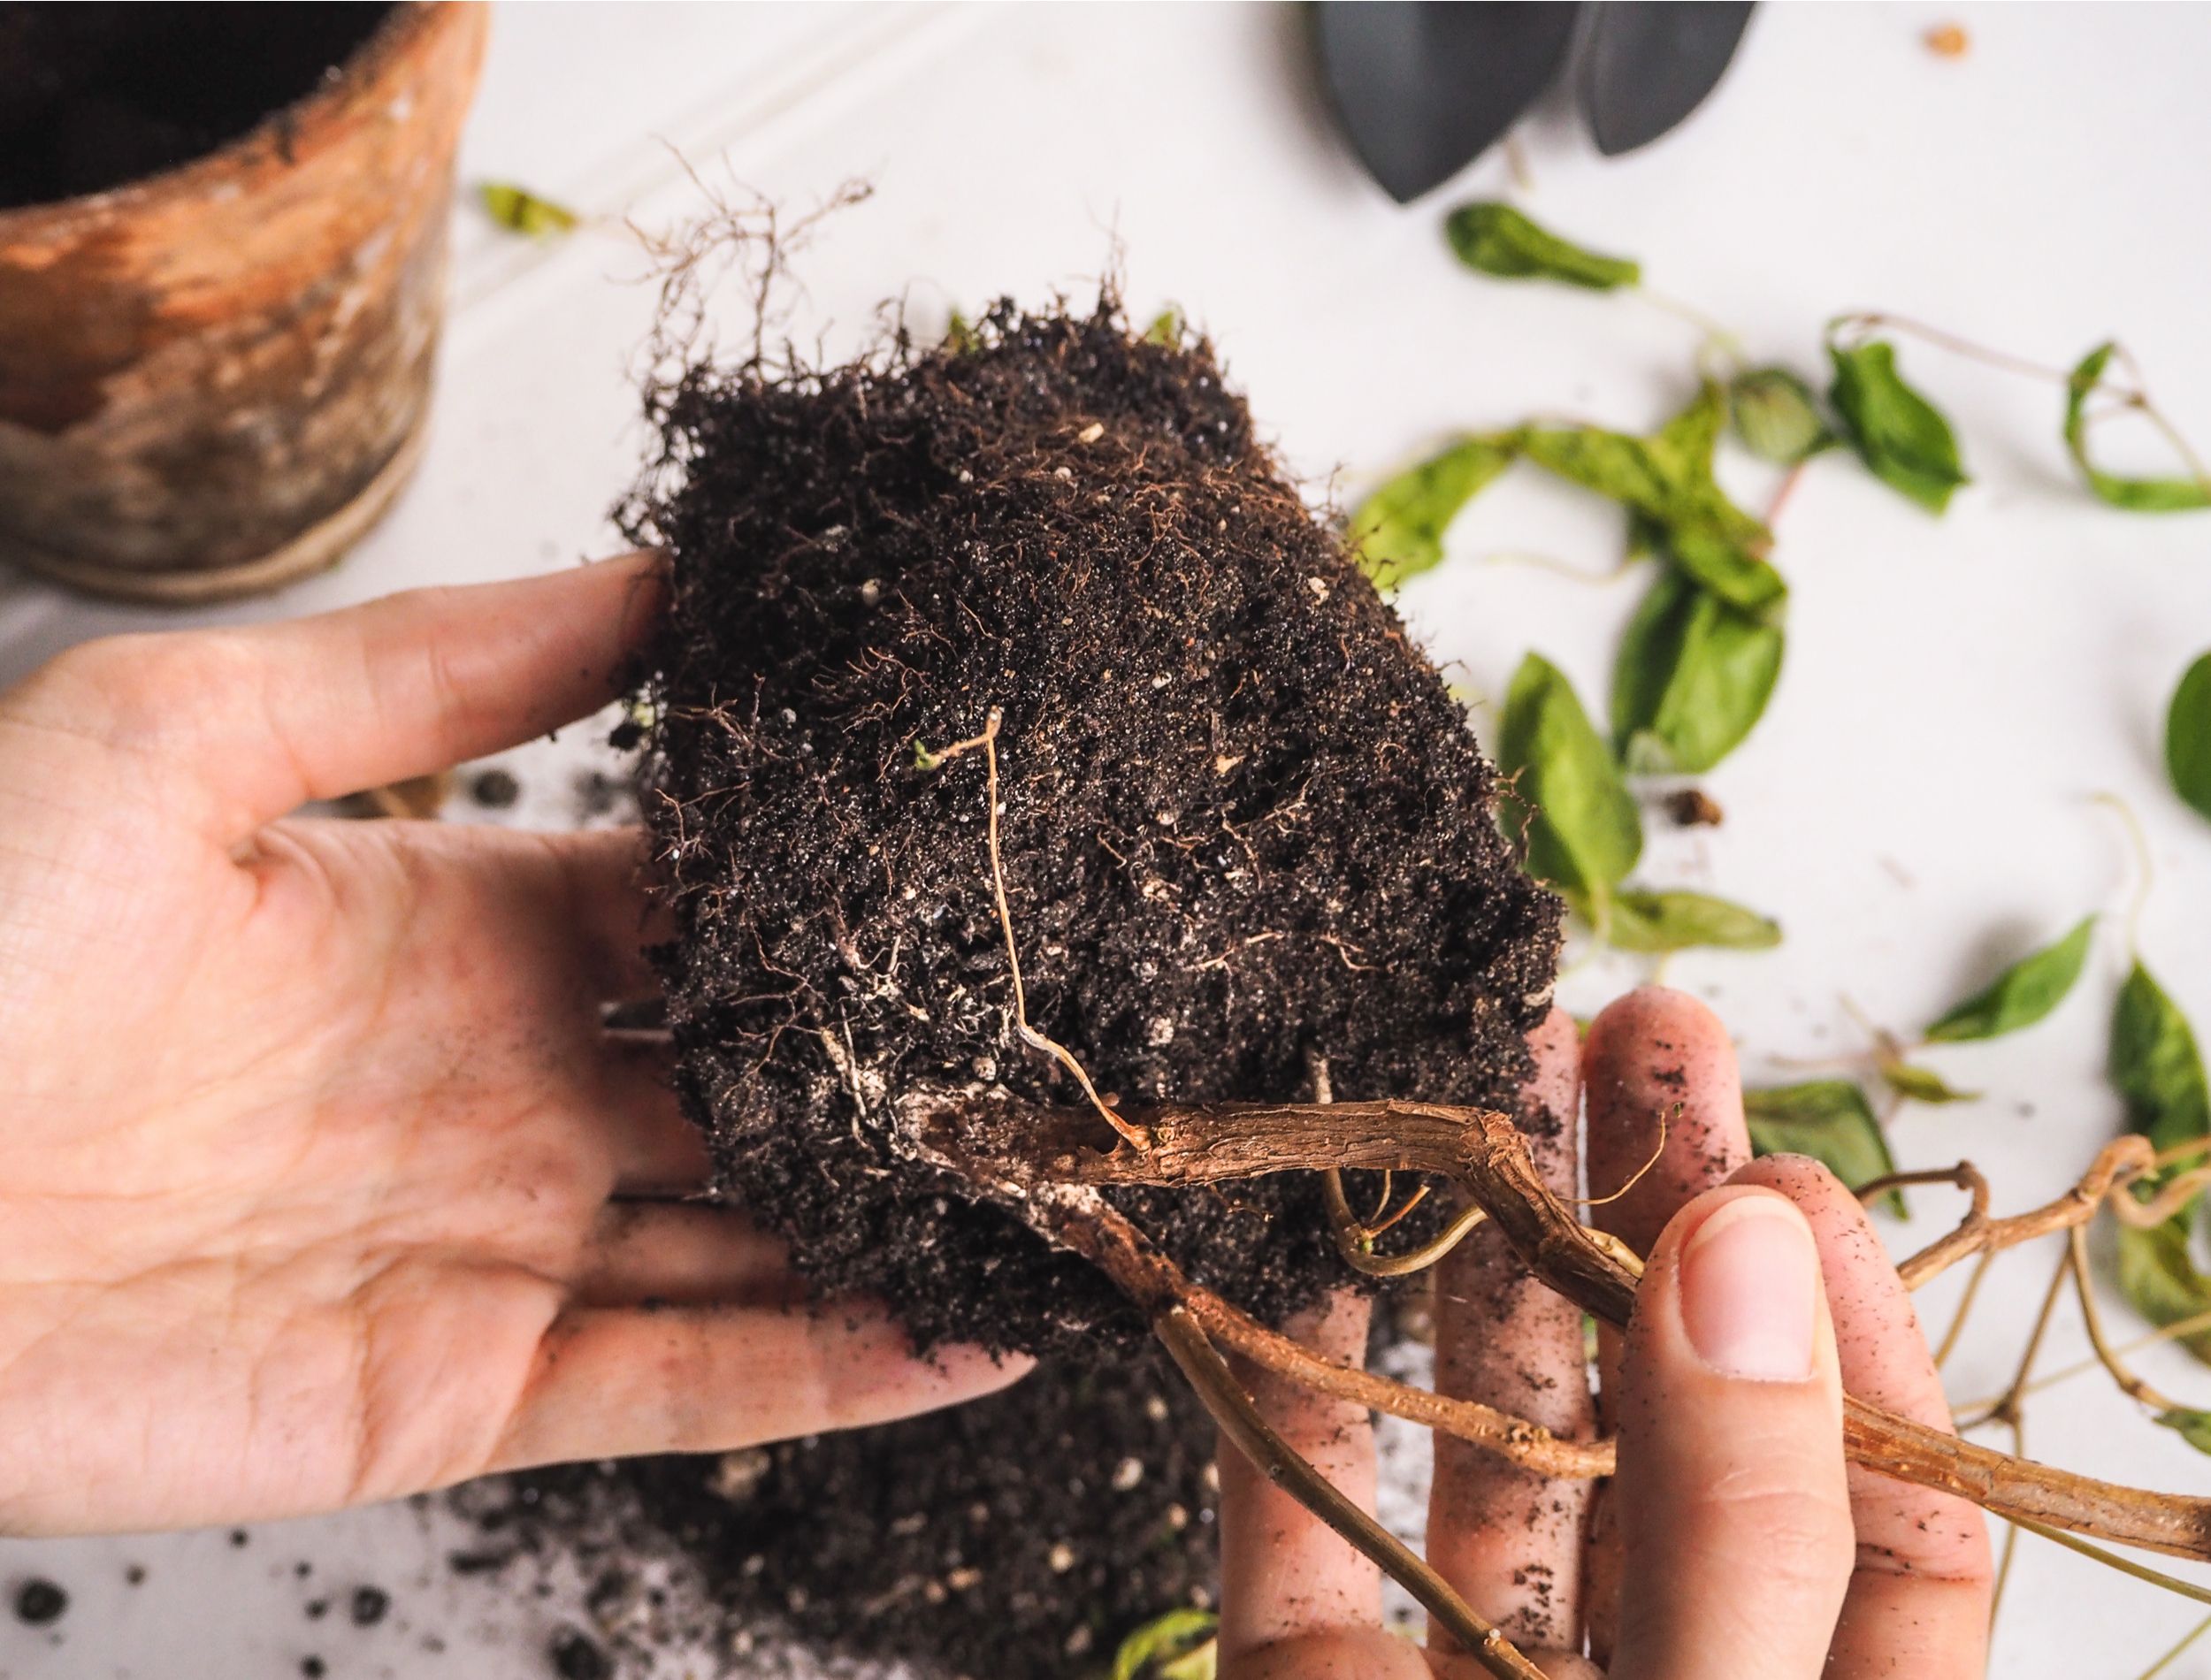 gardener holding plant suffering from root rot